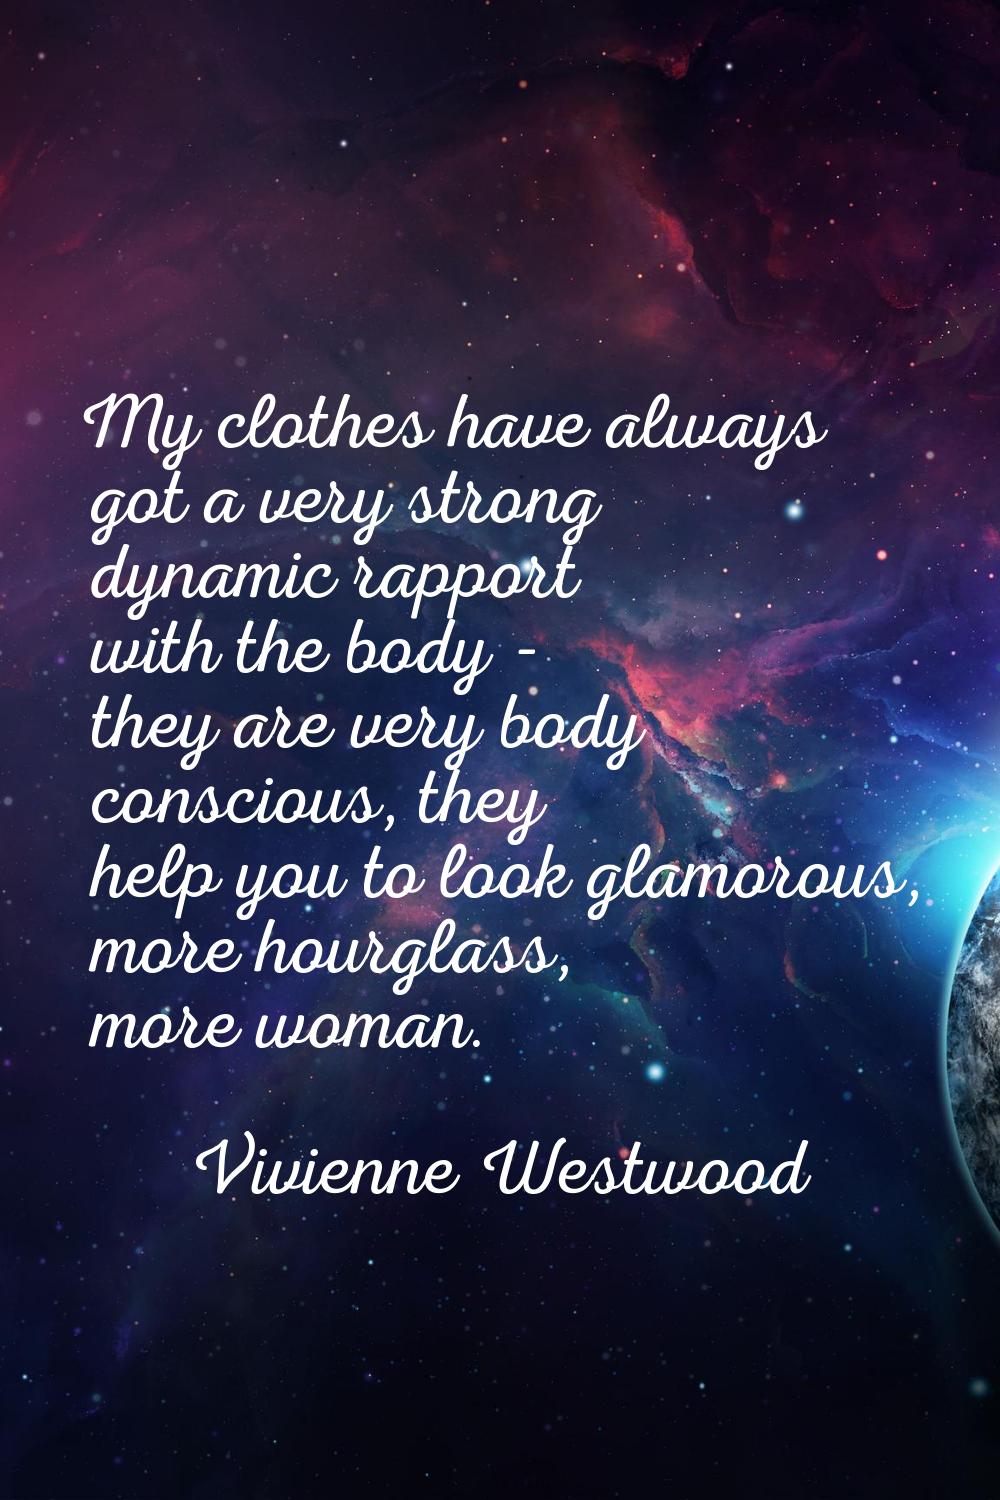 My clothes have always got a very strong dynamic rapport with the body - they are very body conscio